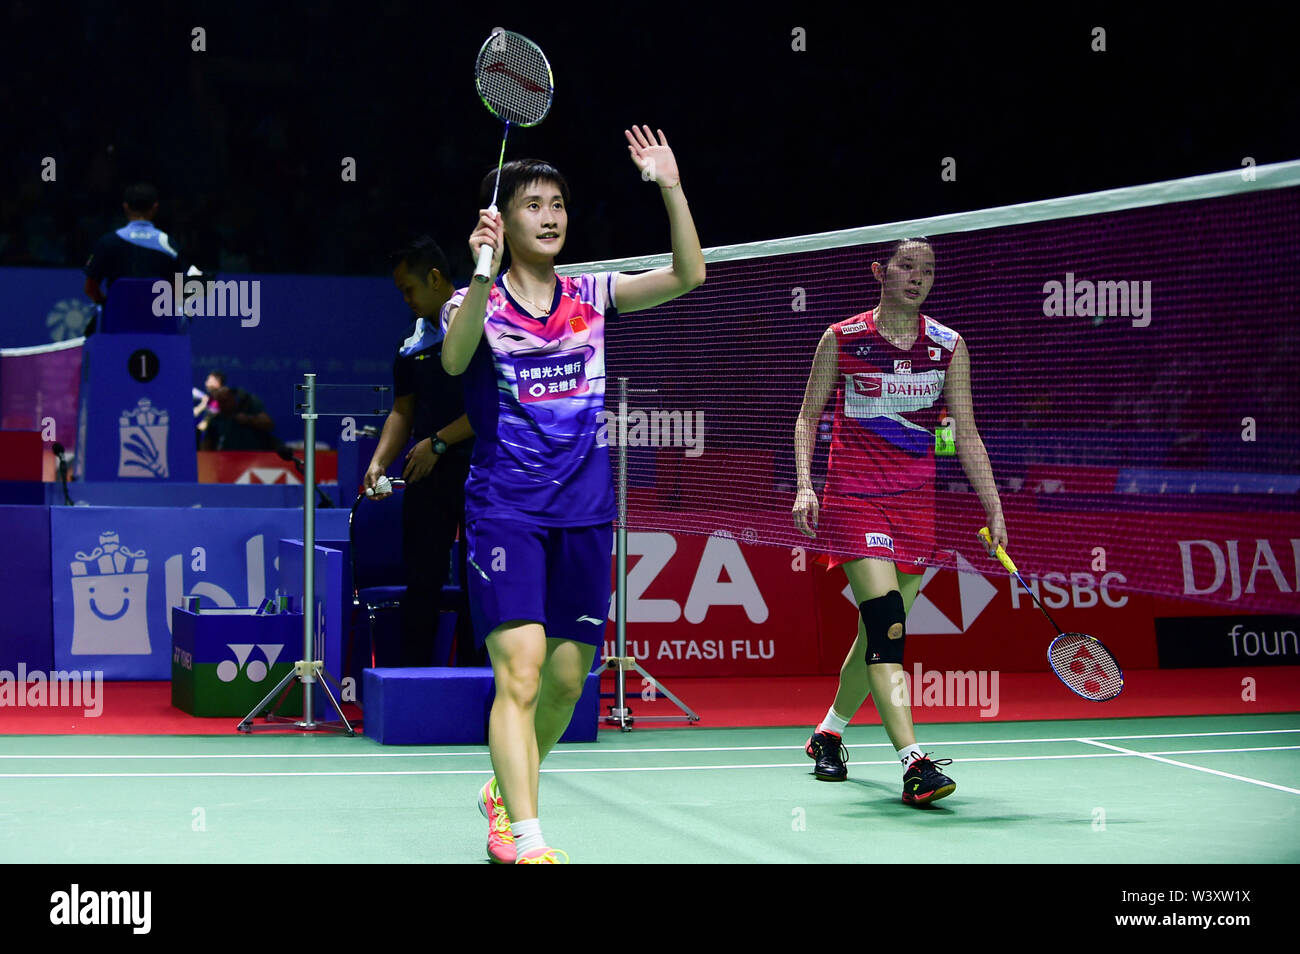 Jakarta. 18th July, 2019. Chen Yufei (L) celebrates her victory after the  women's singles second round match between Chen Yufei of China and Sayaka  Takahashi of Japan at the Indonesia Open 2019